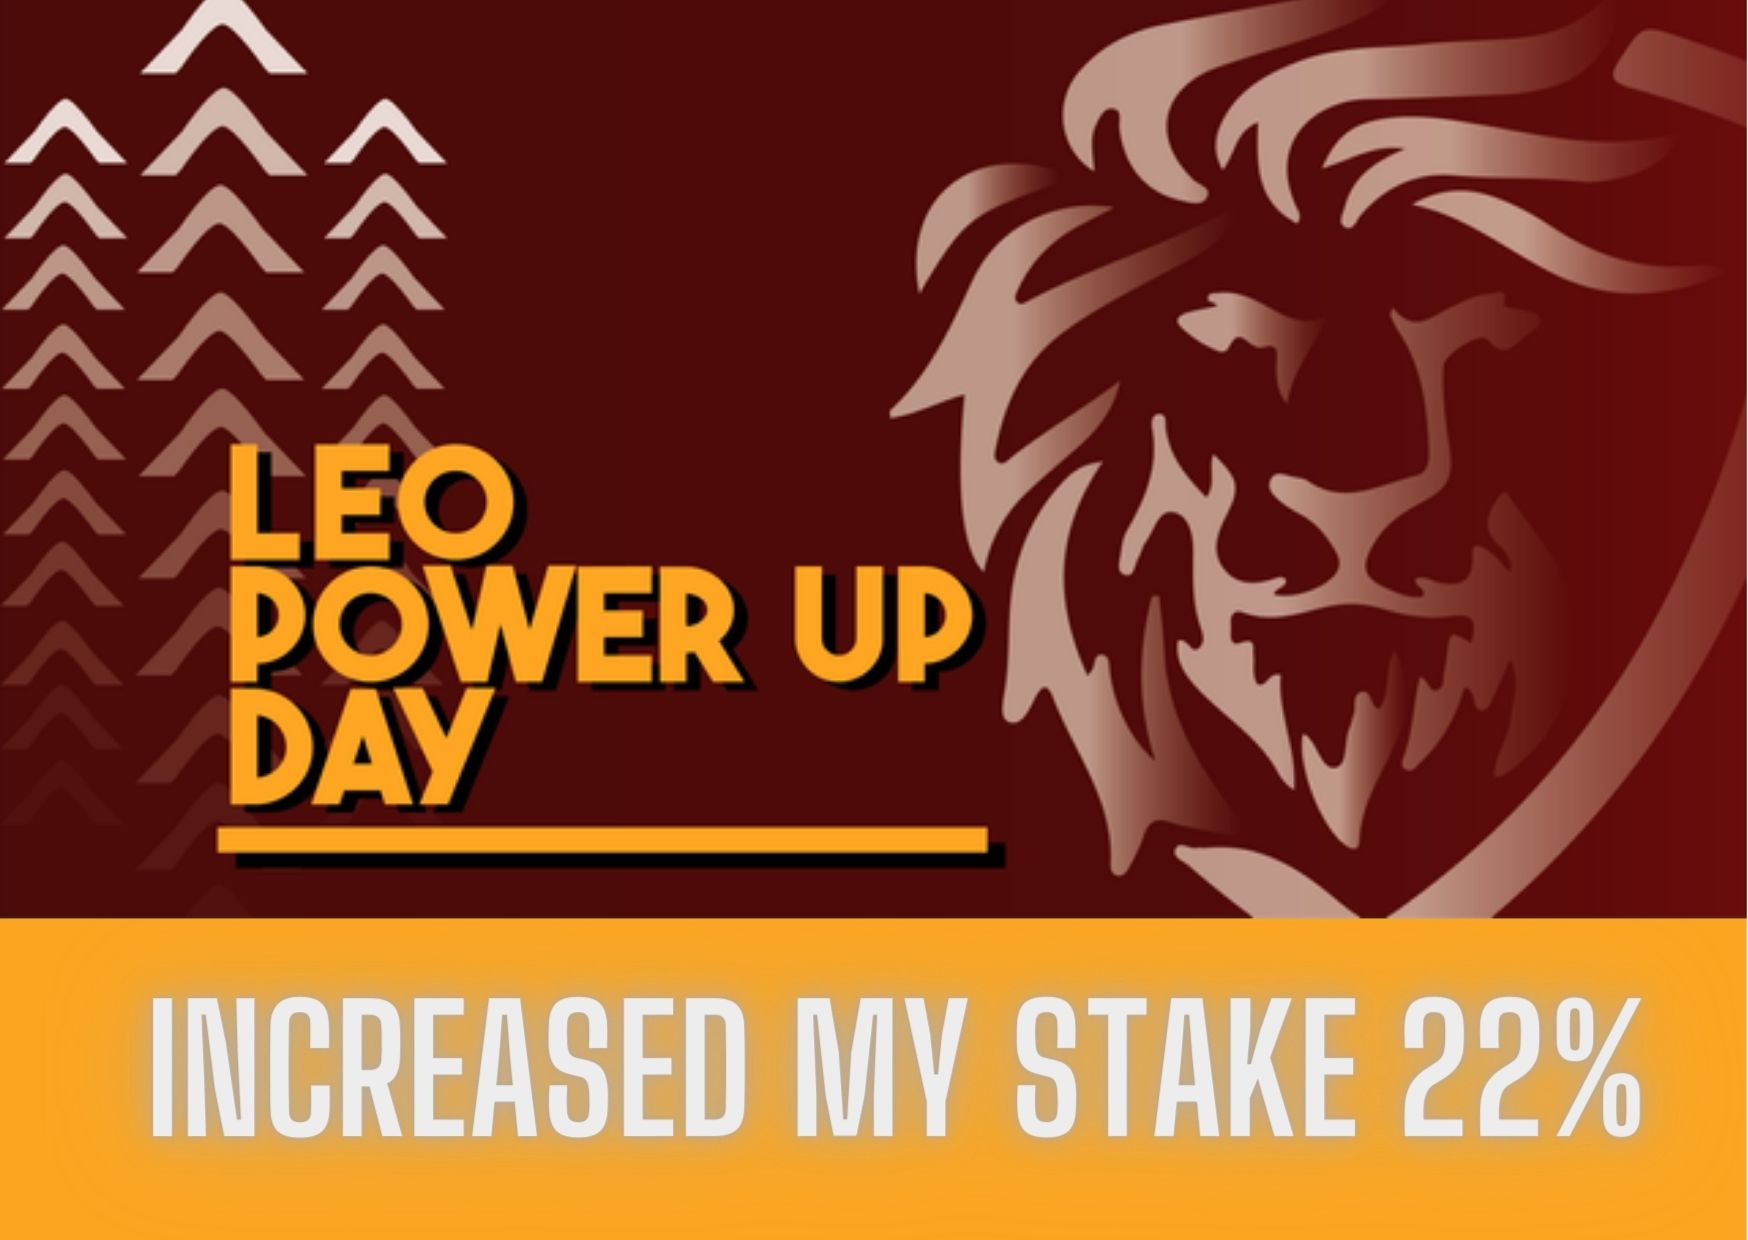 @imno/increasing-my-stake-on-leo-power-up-day